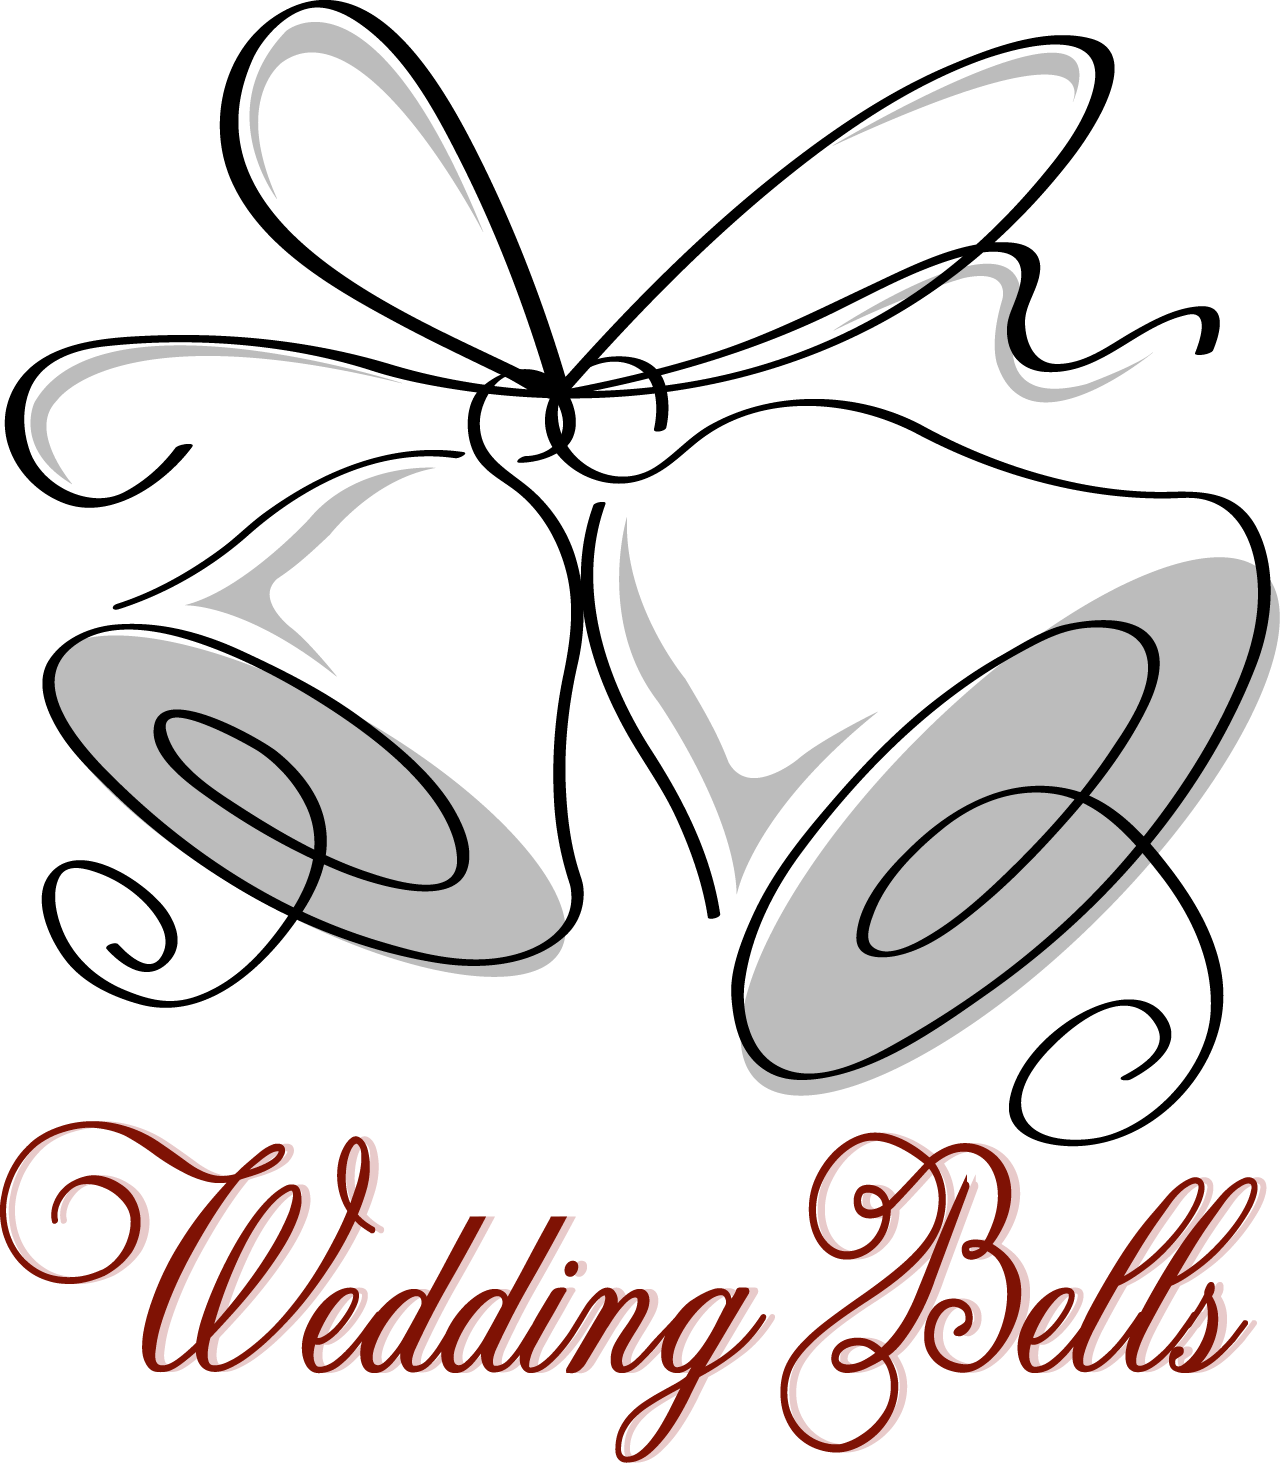 Black And White Wedding Bells Clip Art - Wedding Images In Line - Clip ...